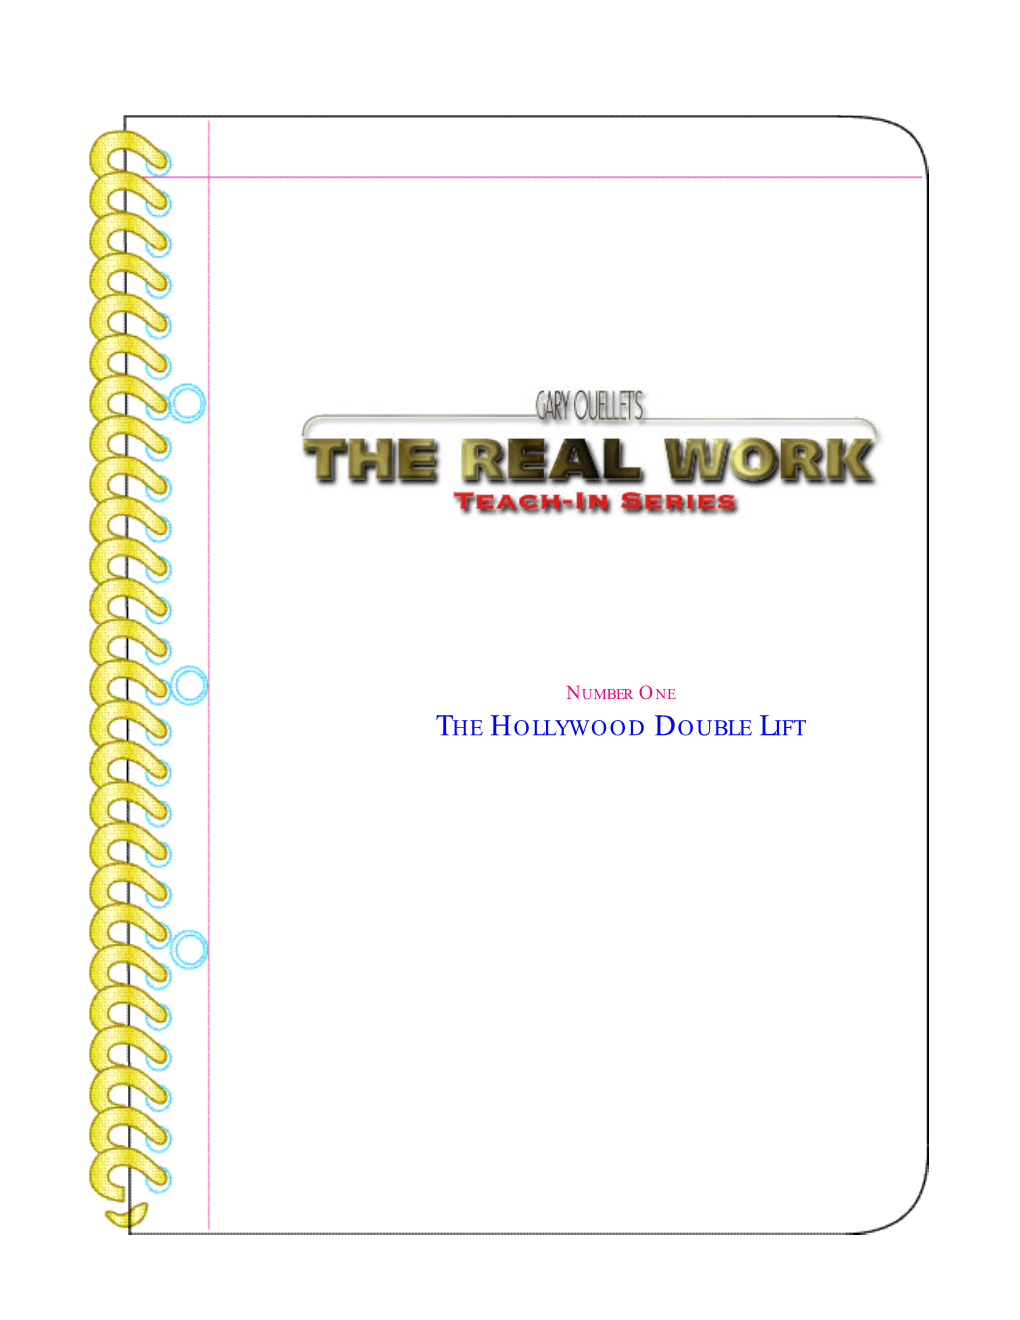 The Real Work Teach-In Series Is a Collection of Manuscripts Being Published in Electronic Form for On-Line Distribution